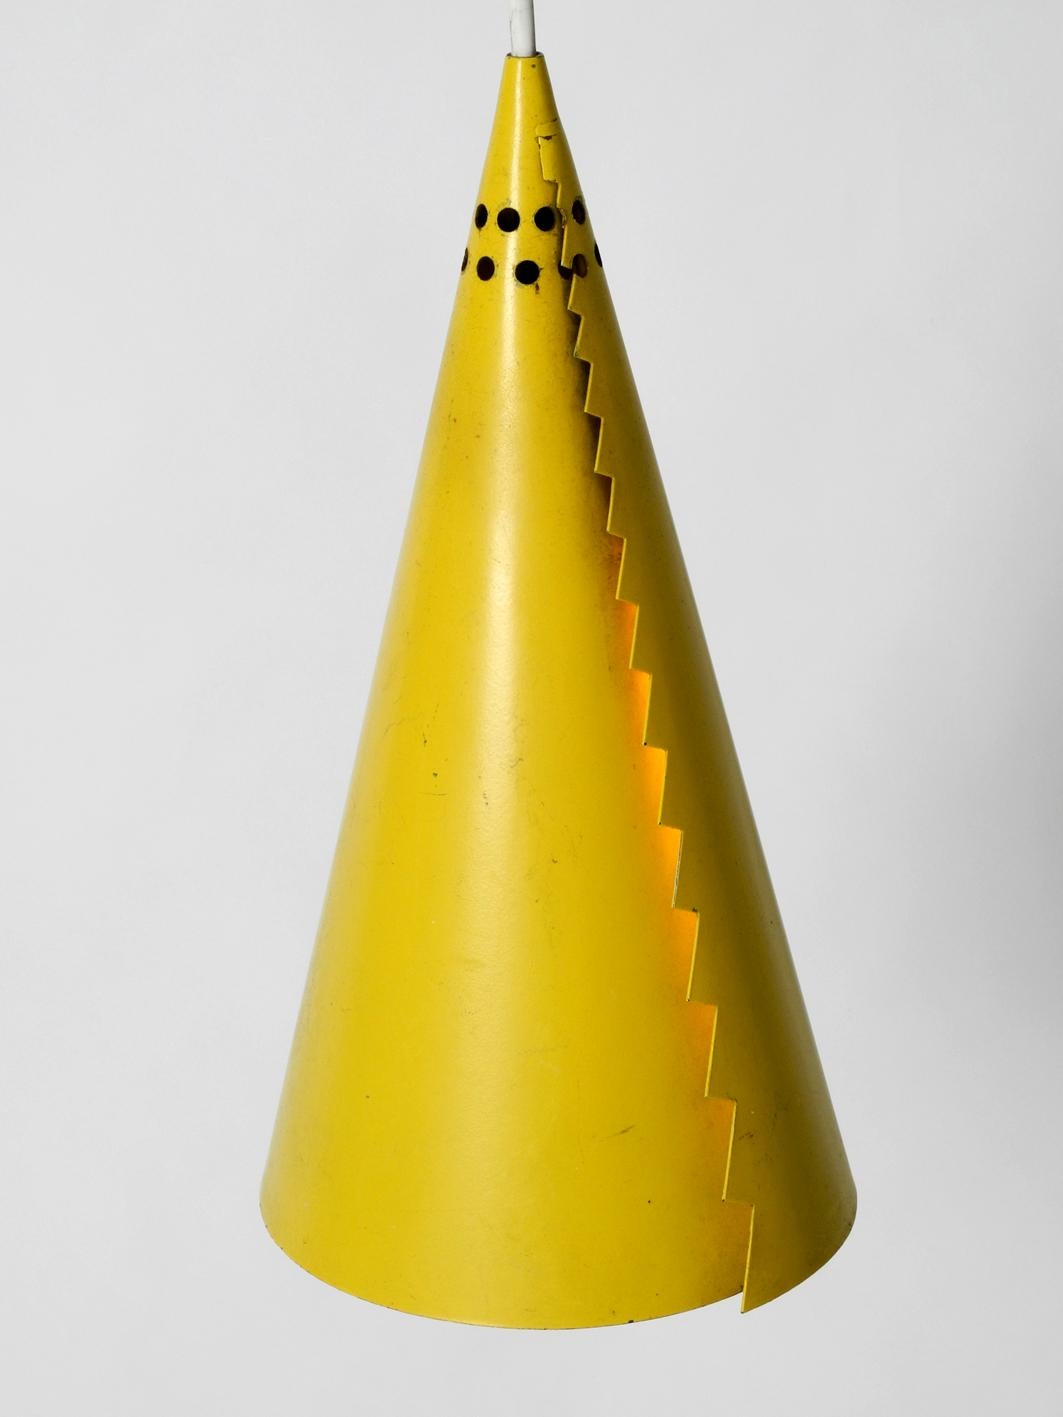 European Rare Mid-Century Modern Cone Shaped Pendant Lamp Made of Sheet Steel in Yellow For Sale